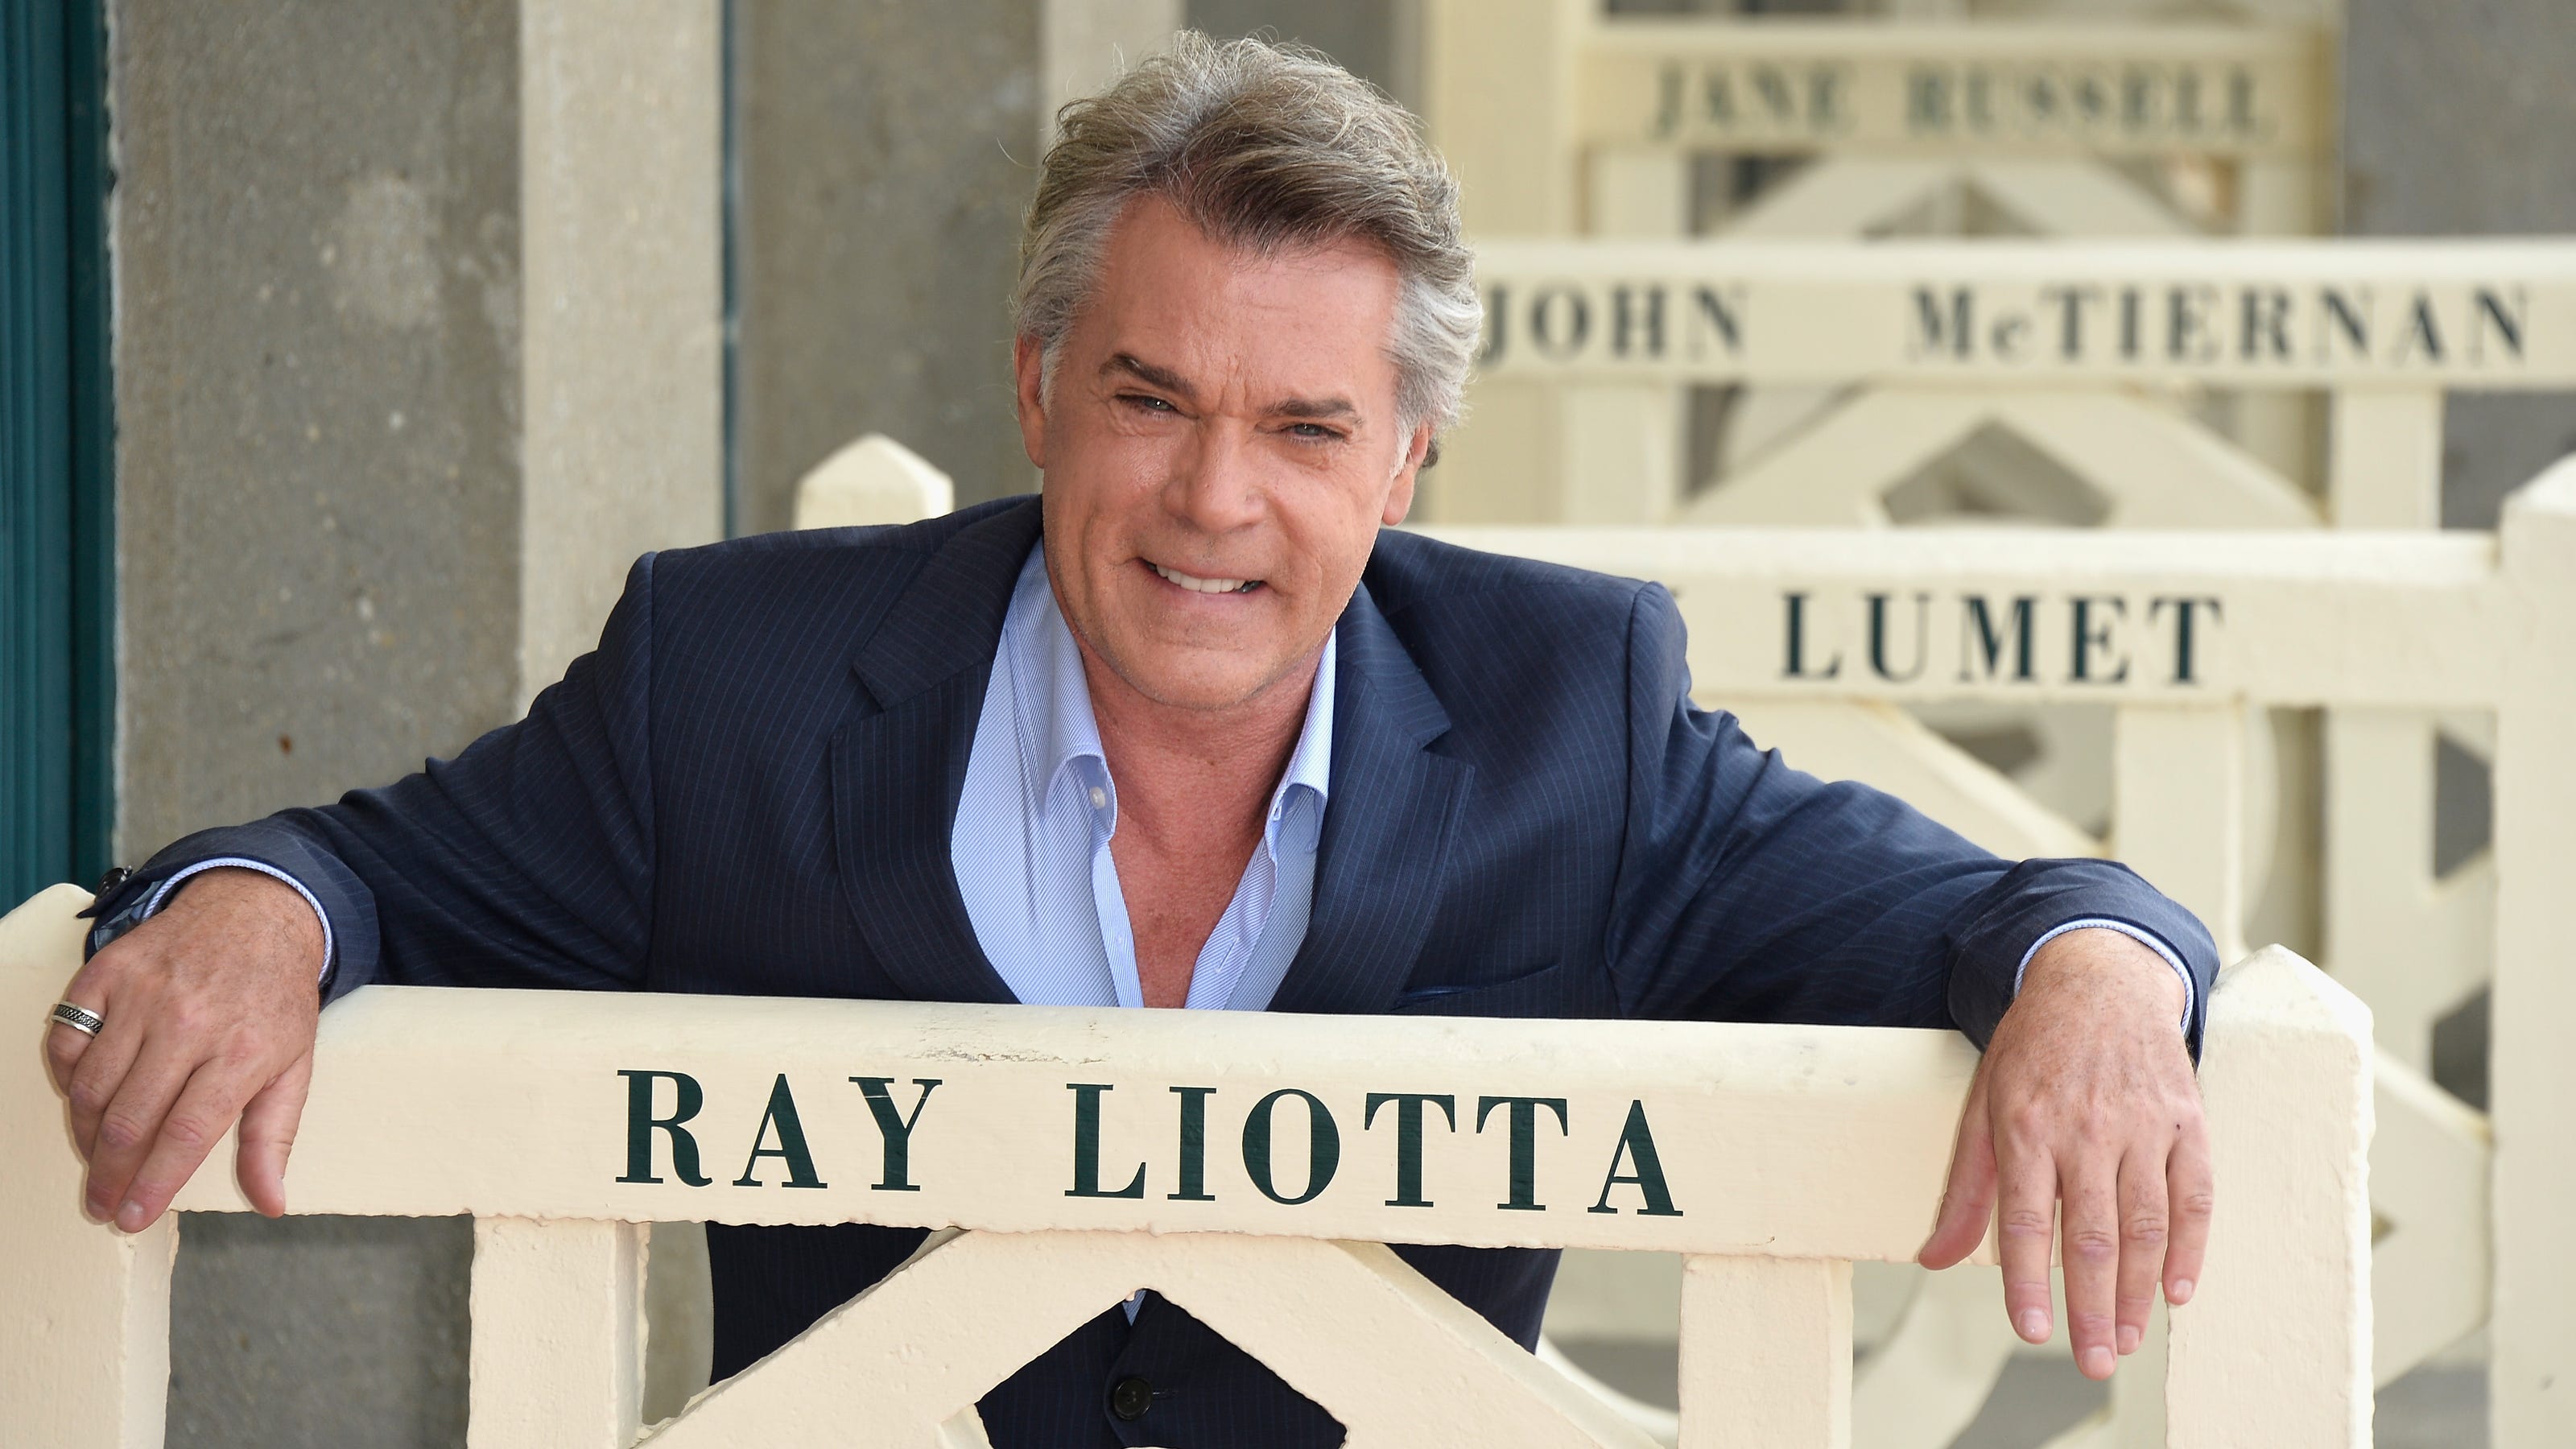 Ray Liotta death: Fiancée Jacy Nittolo reflects on 'magical' years